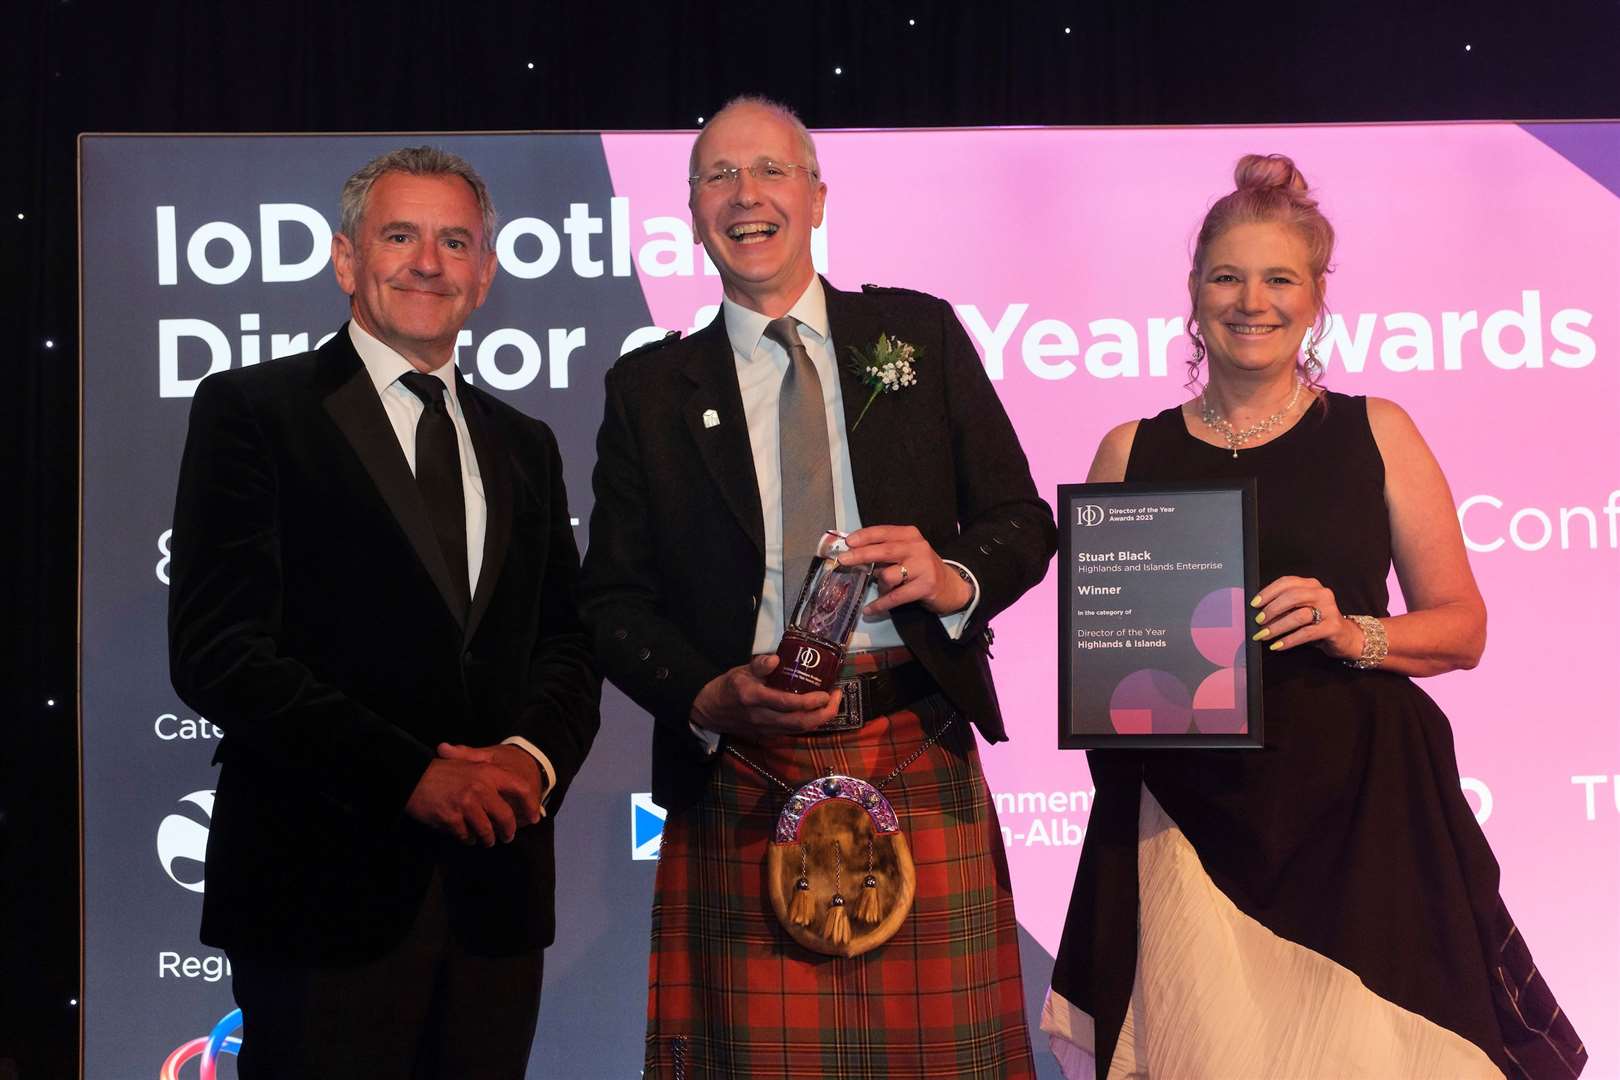 Stuart Black receiving the award presented by Julie Ashworth, chairwoman of Institute of Directors Scotland, alongside broadcaster and presenter of the ceremony Stephen Jardine.